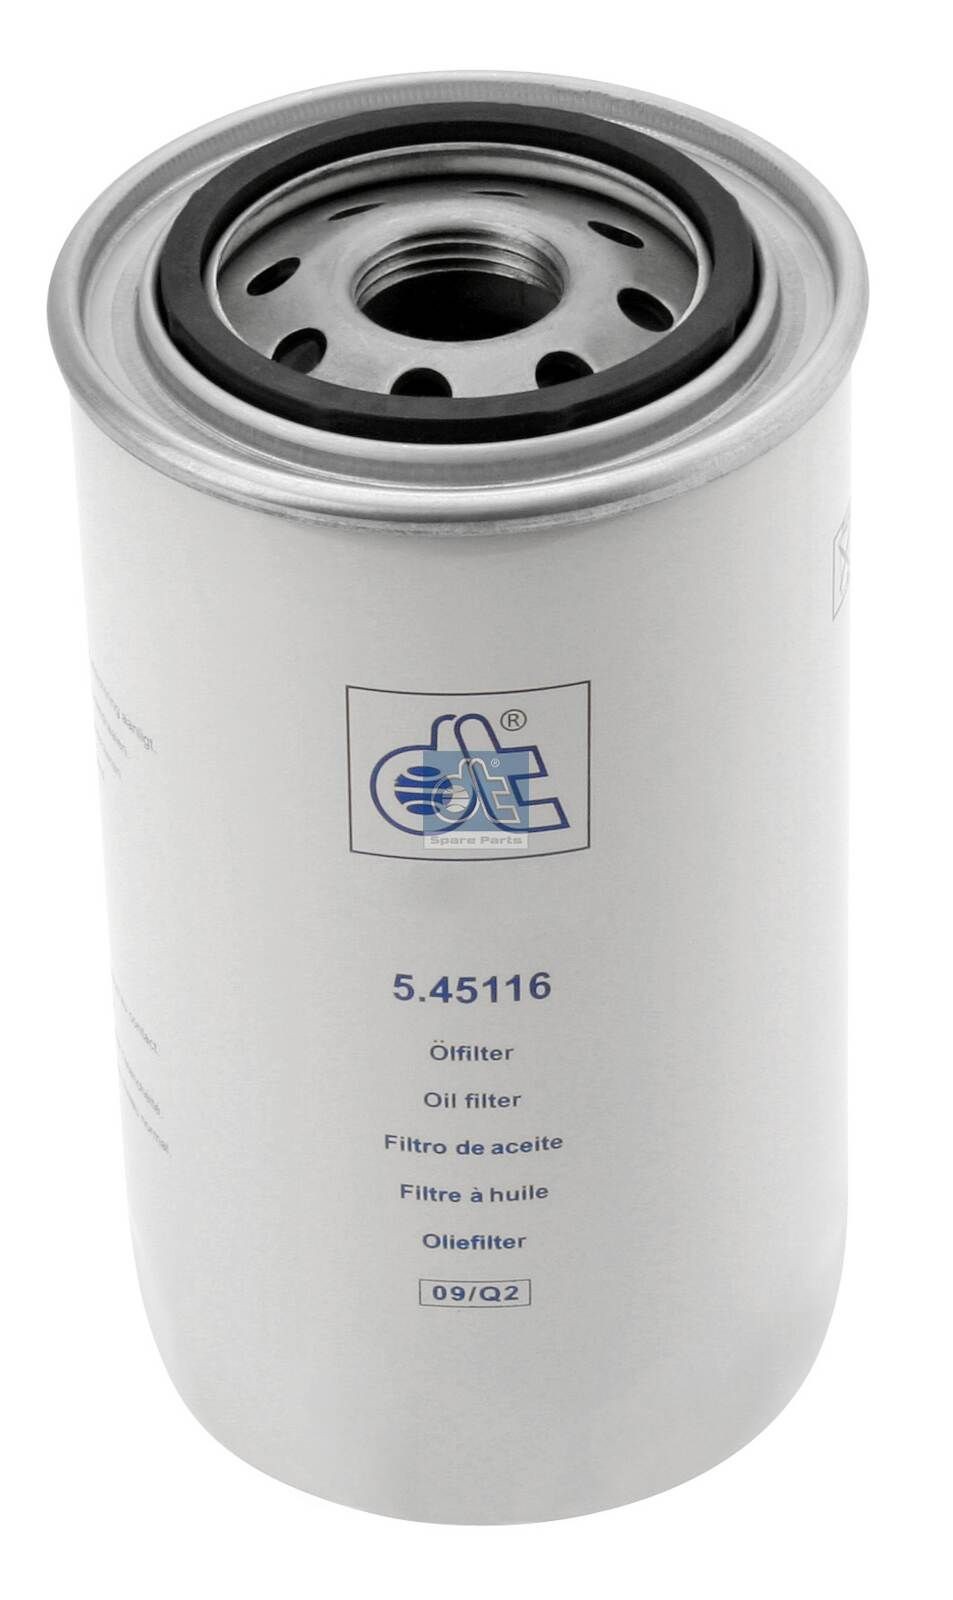 H19W10 DT Spare Parts 5.45116 Oil filter 41501316